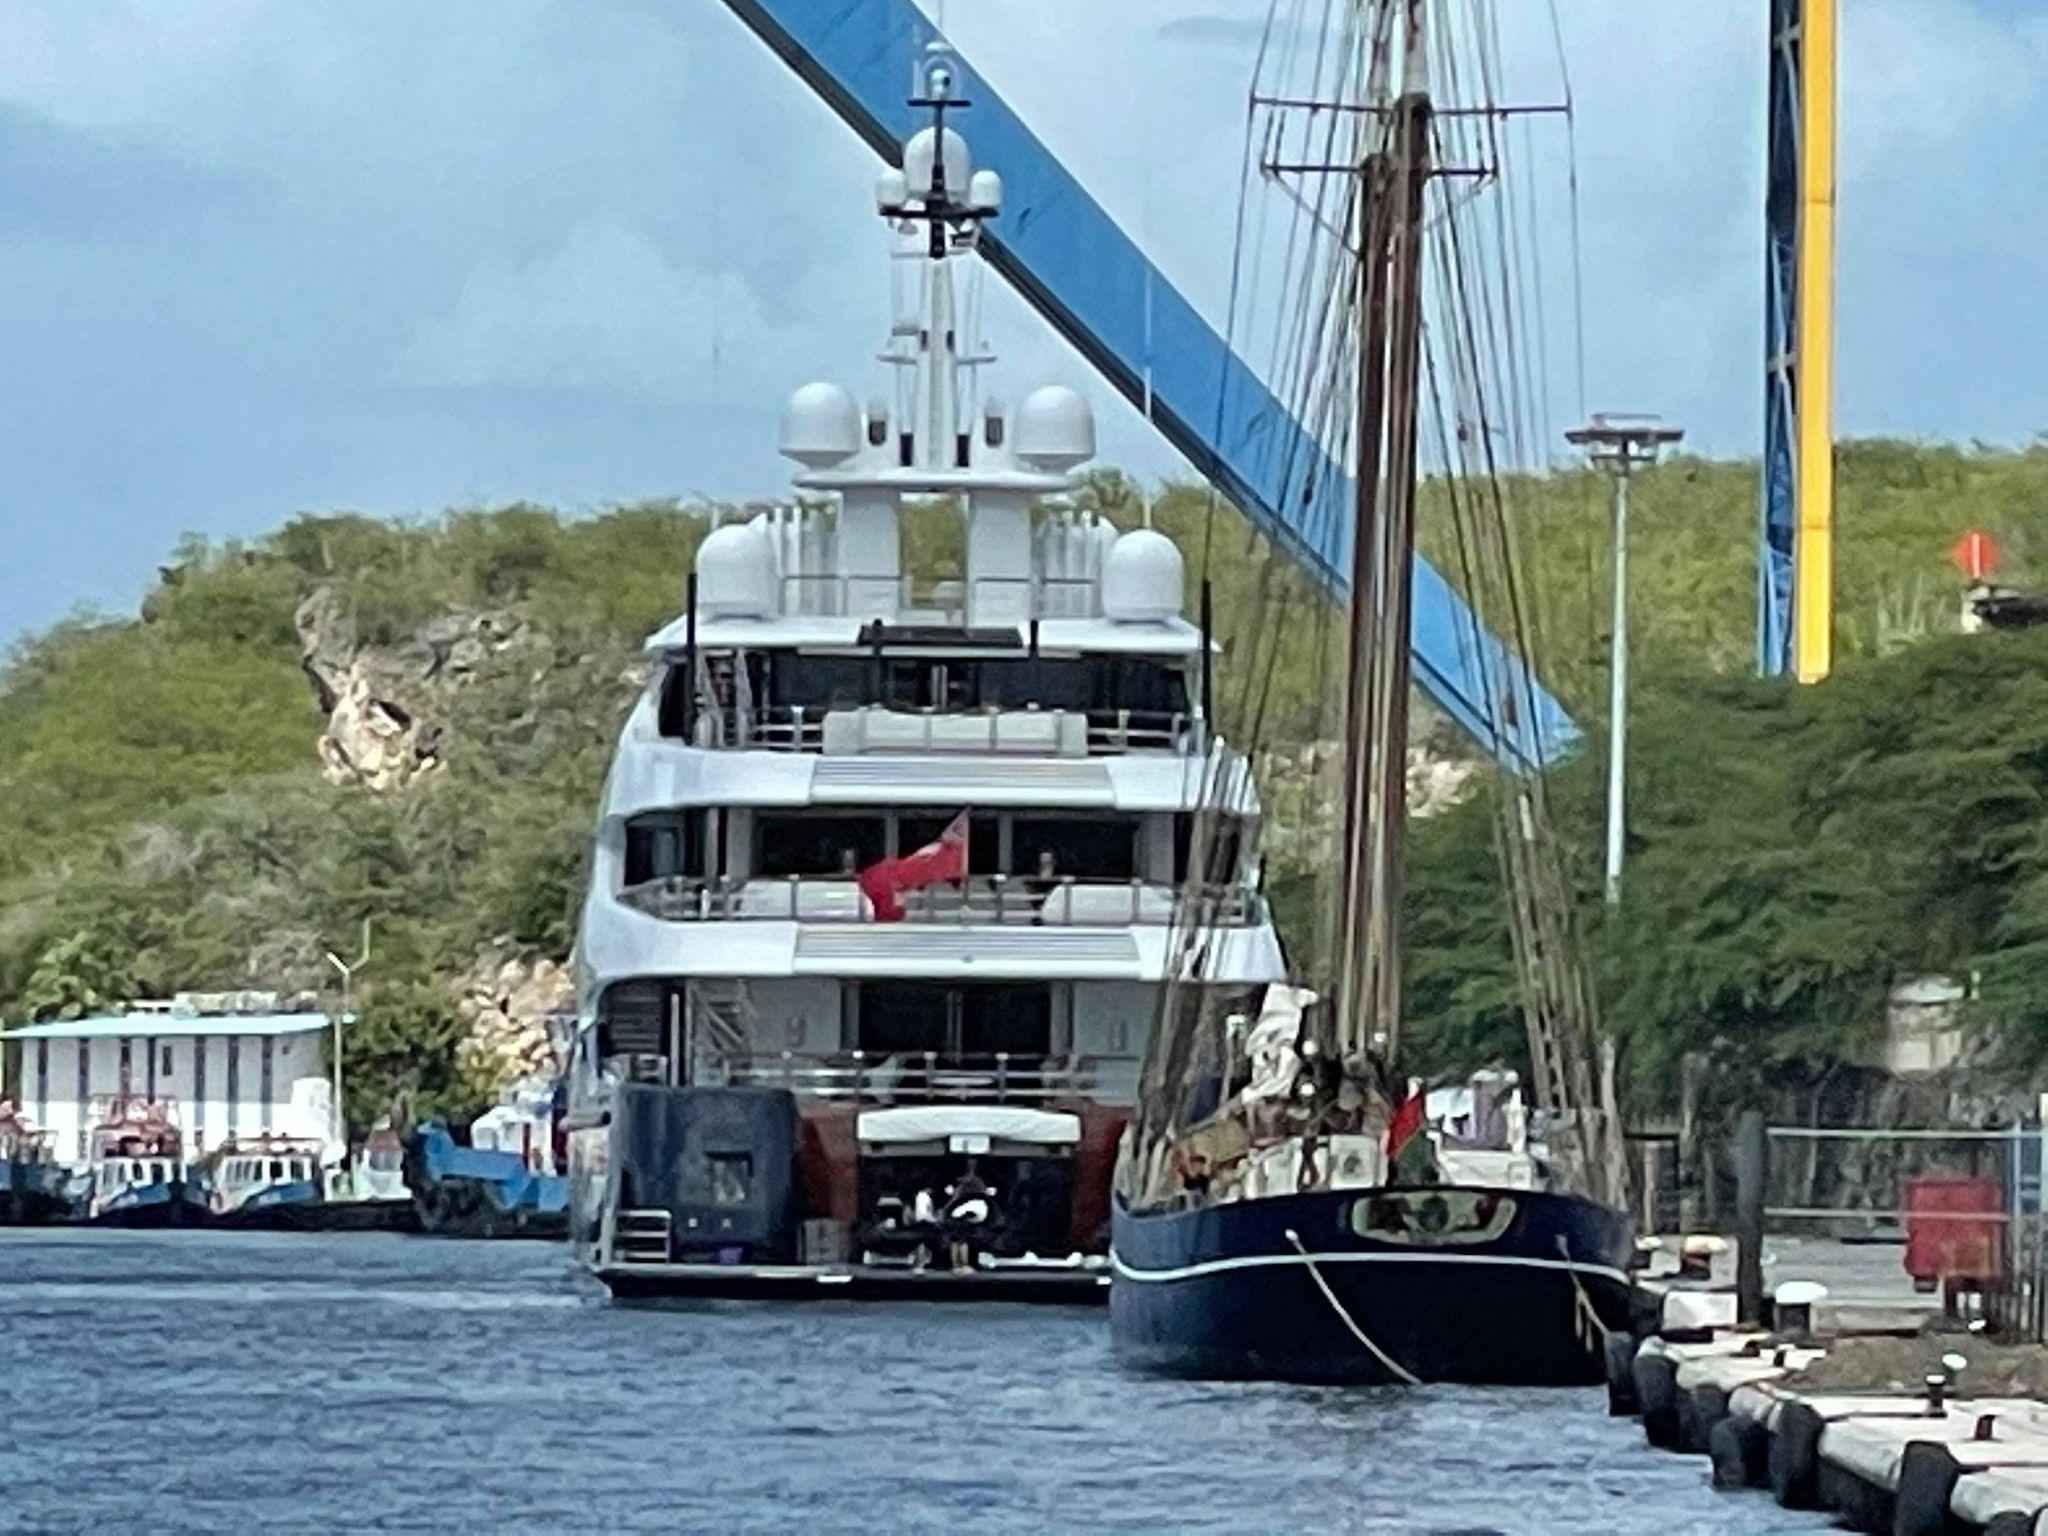 The Oceanco yacht Barbara in Willemstad Curacao